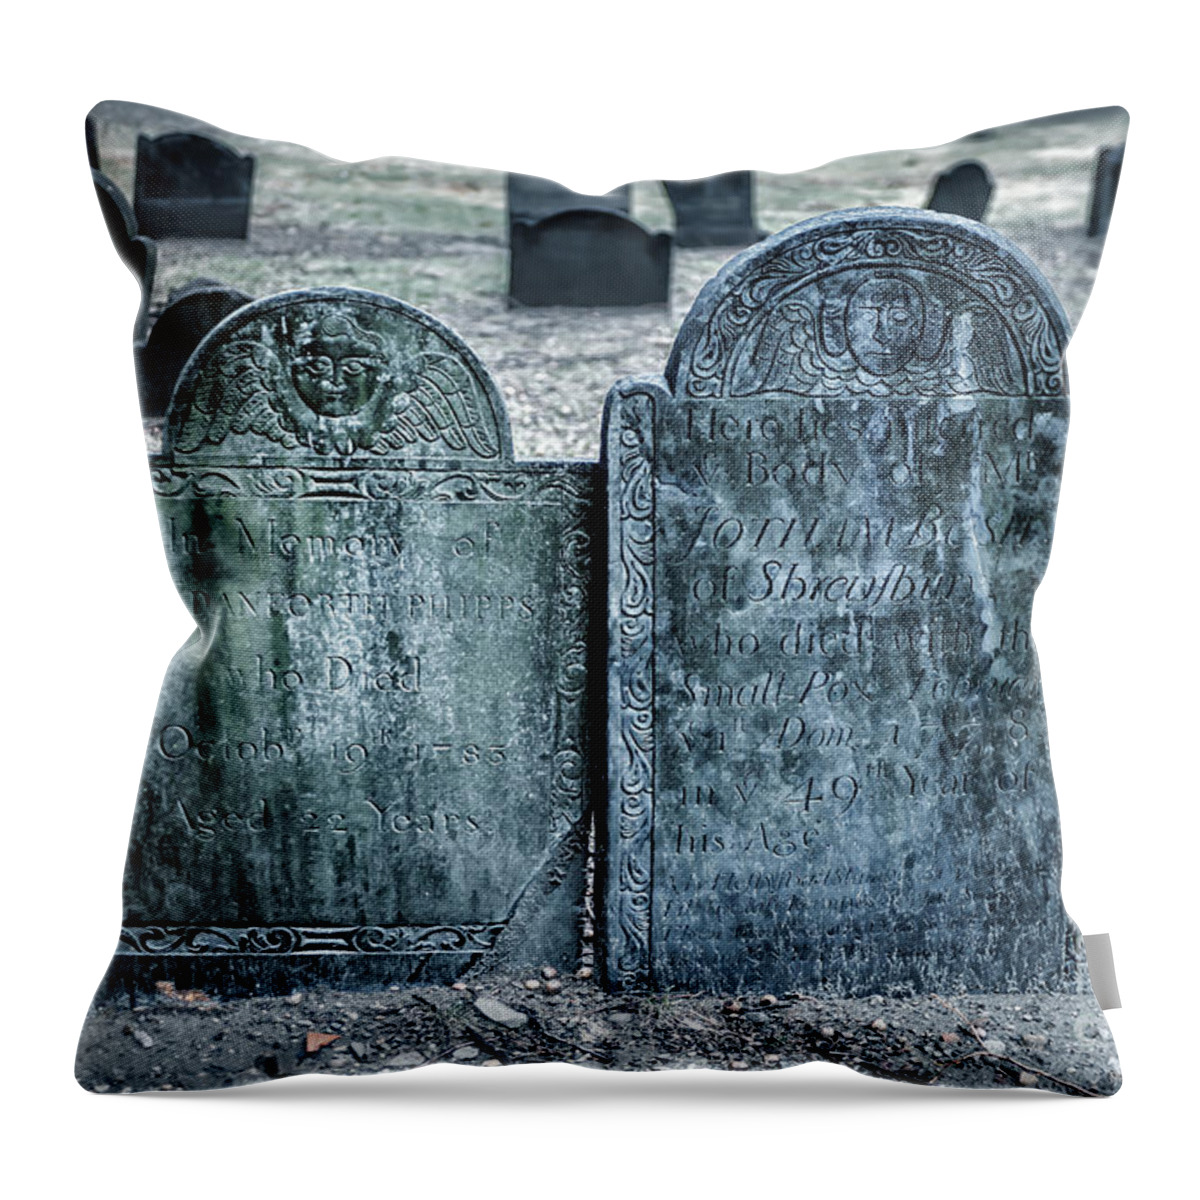 Cemetery Throw Pillow featuring the photograph Death by Smallpox by Tamyra Ayles